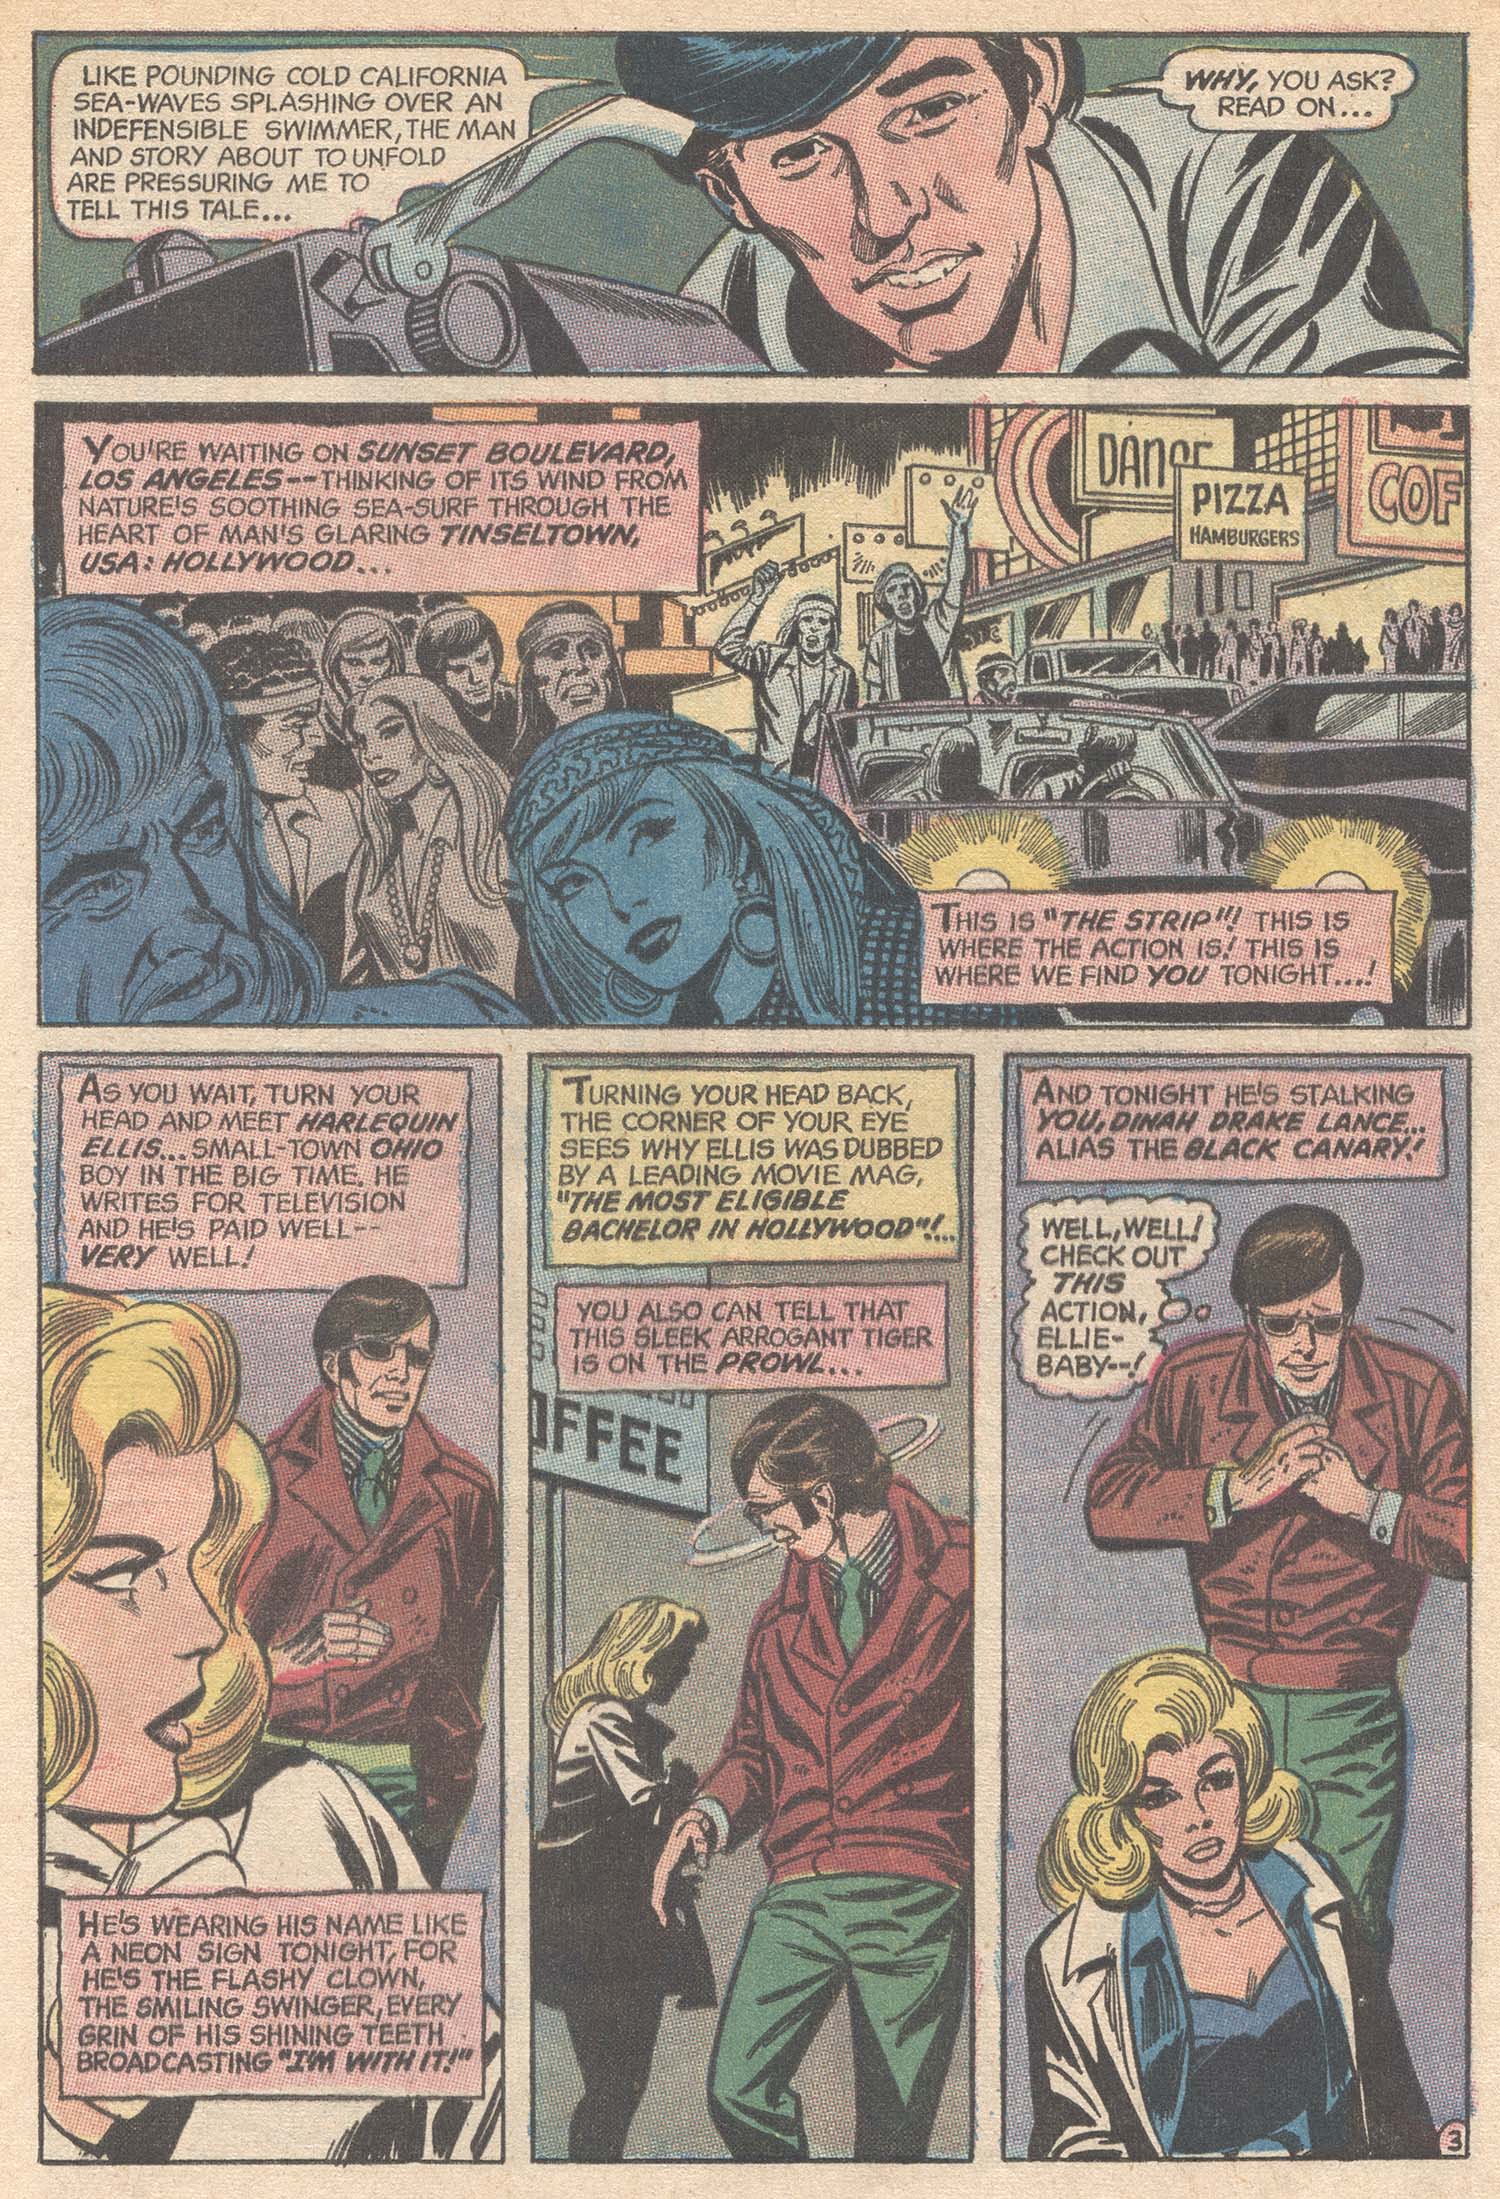 Justice League of America #89, art by Dick Dillin and Joe Giella